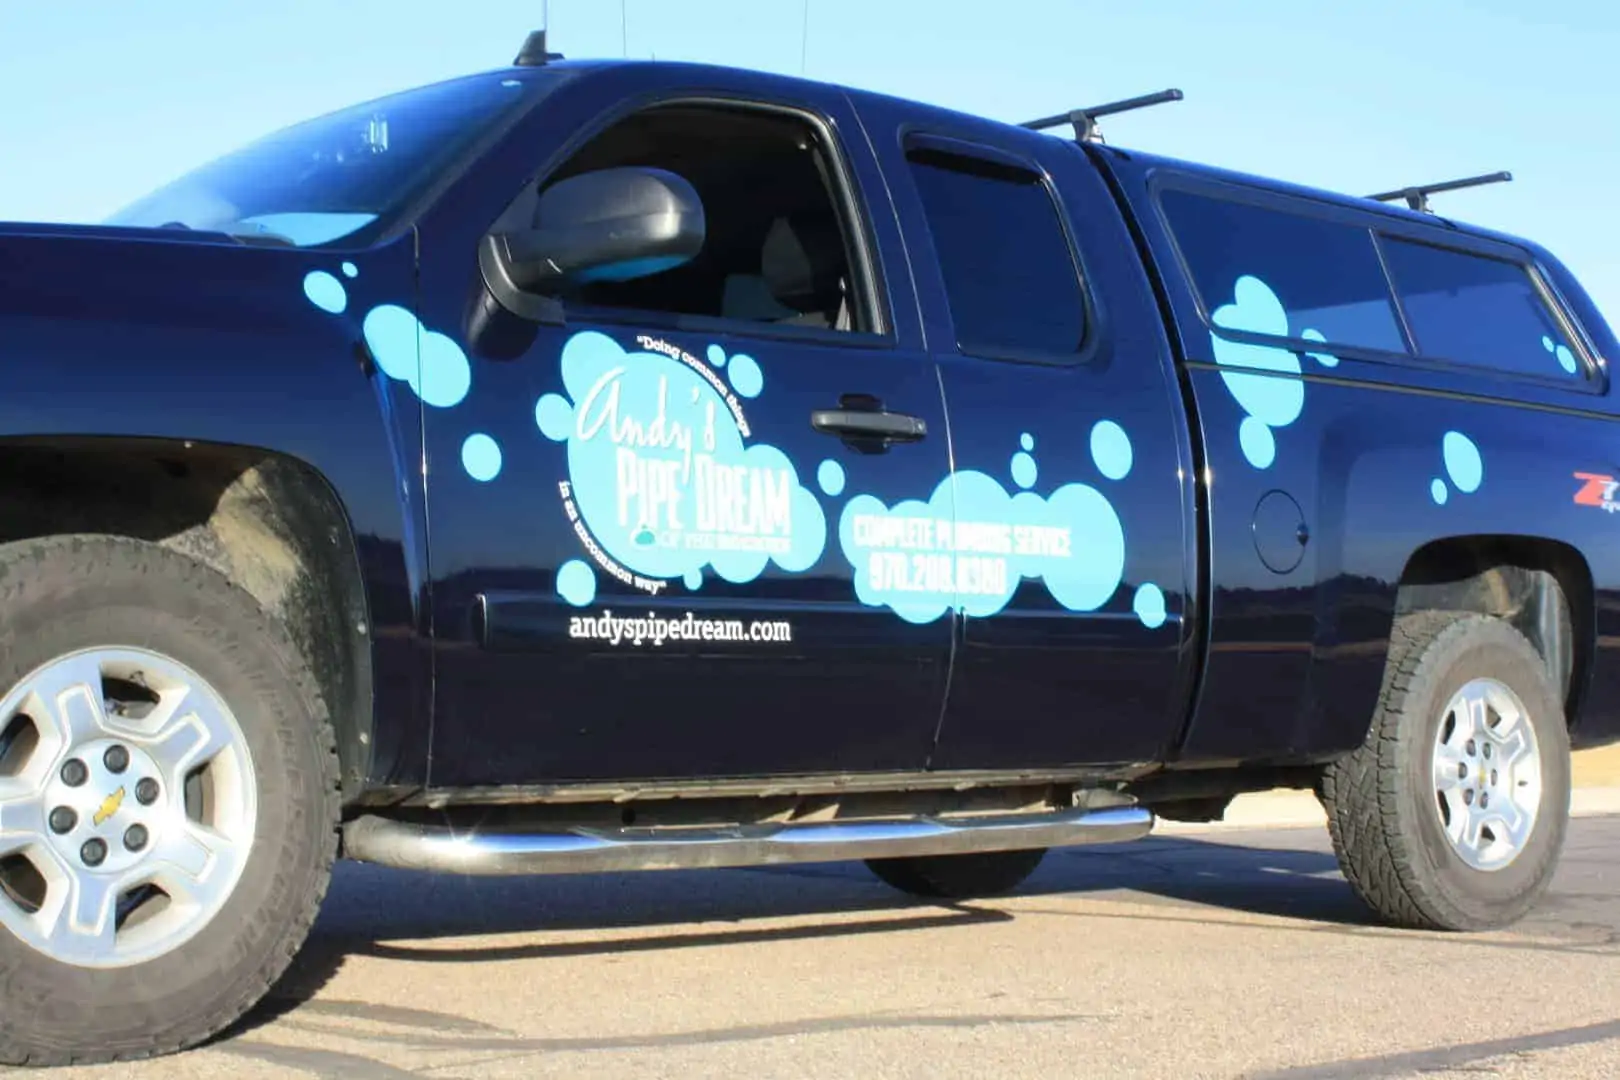 Andy's Pipe Dream uses 3M's reflective vehicle graphics to make his message stand out day or night